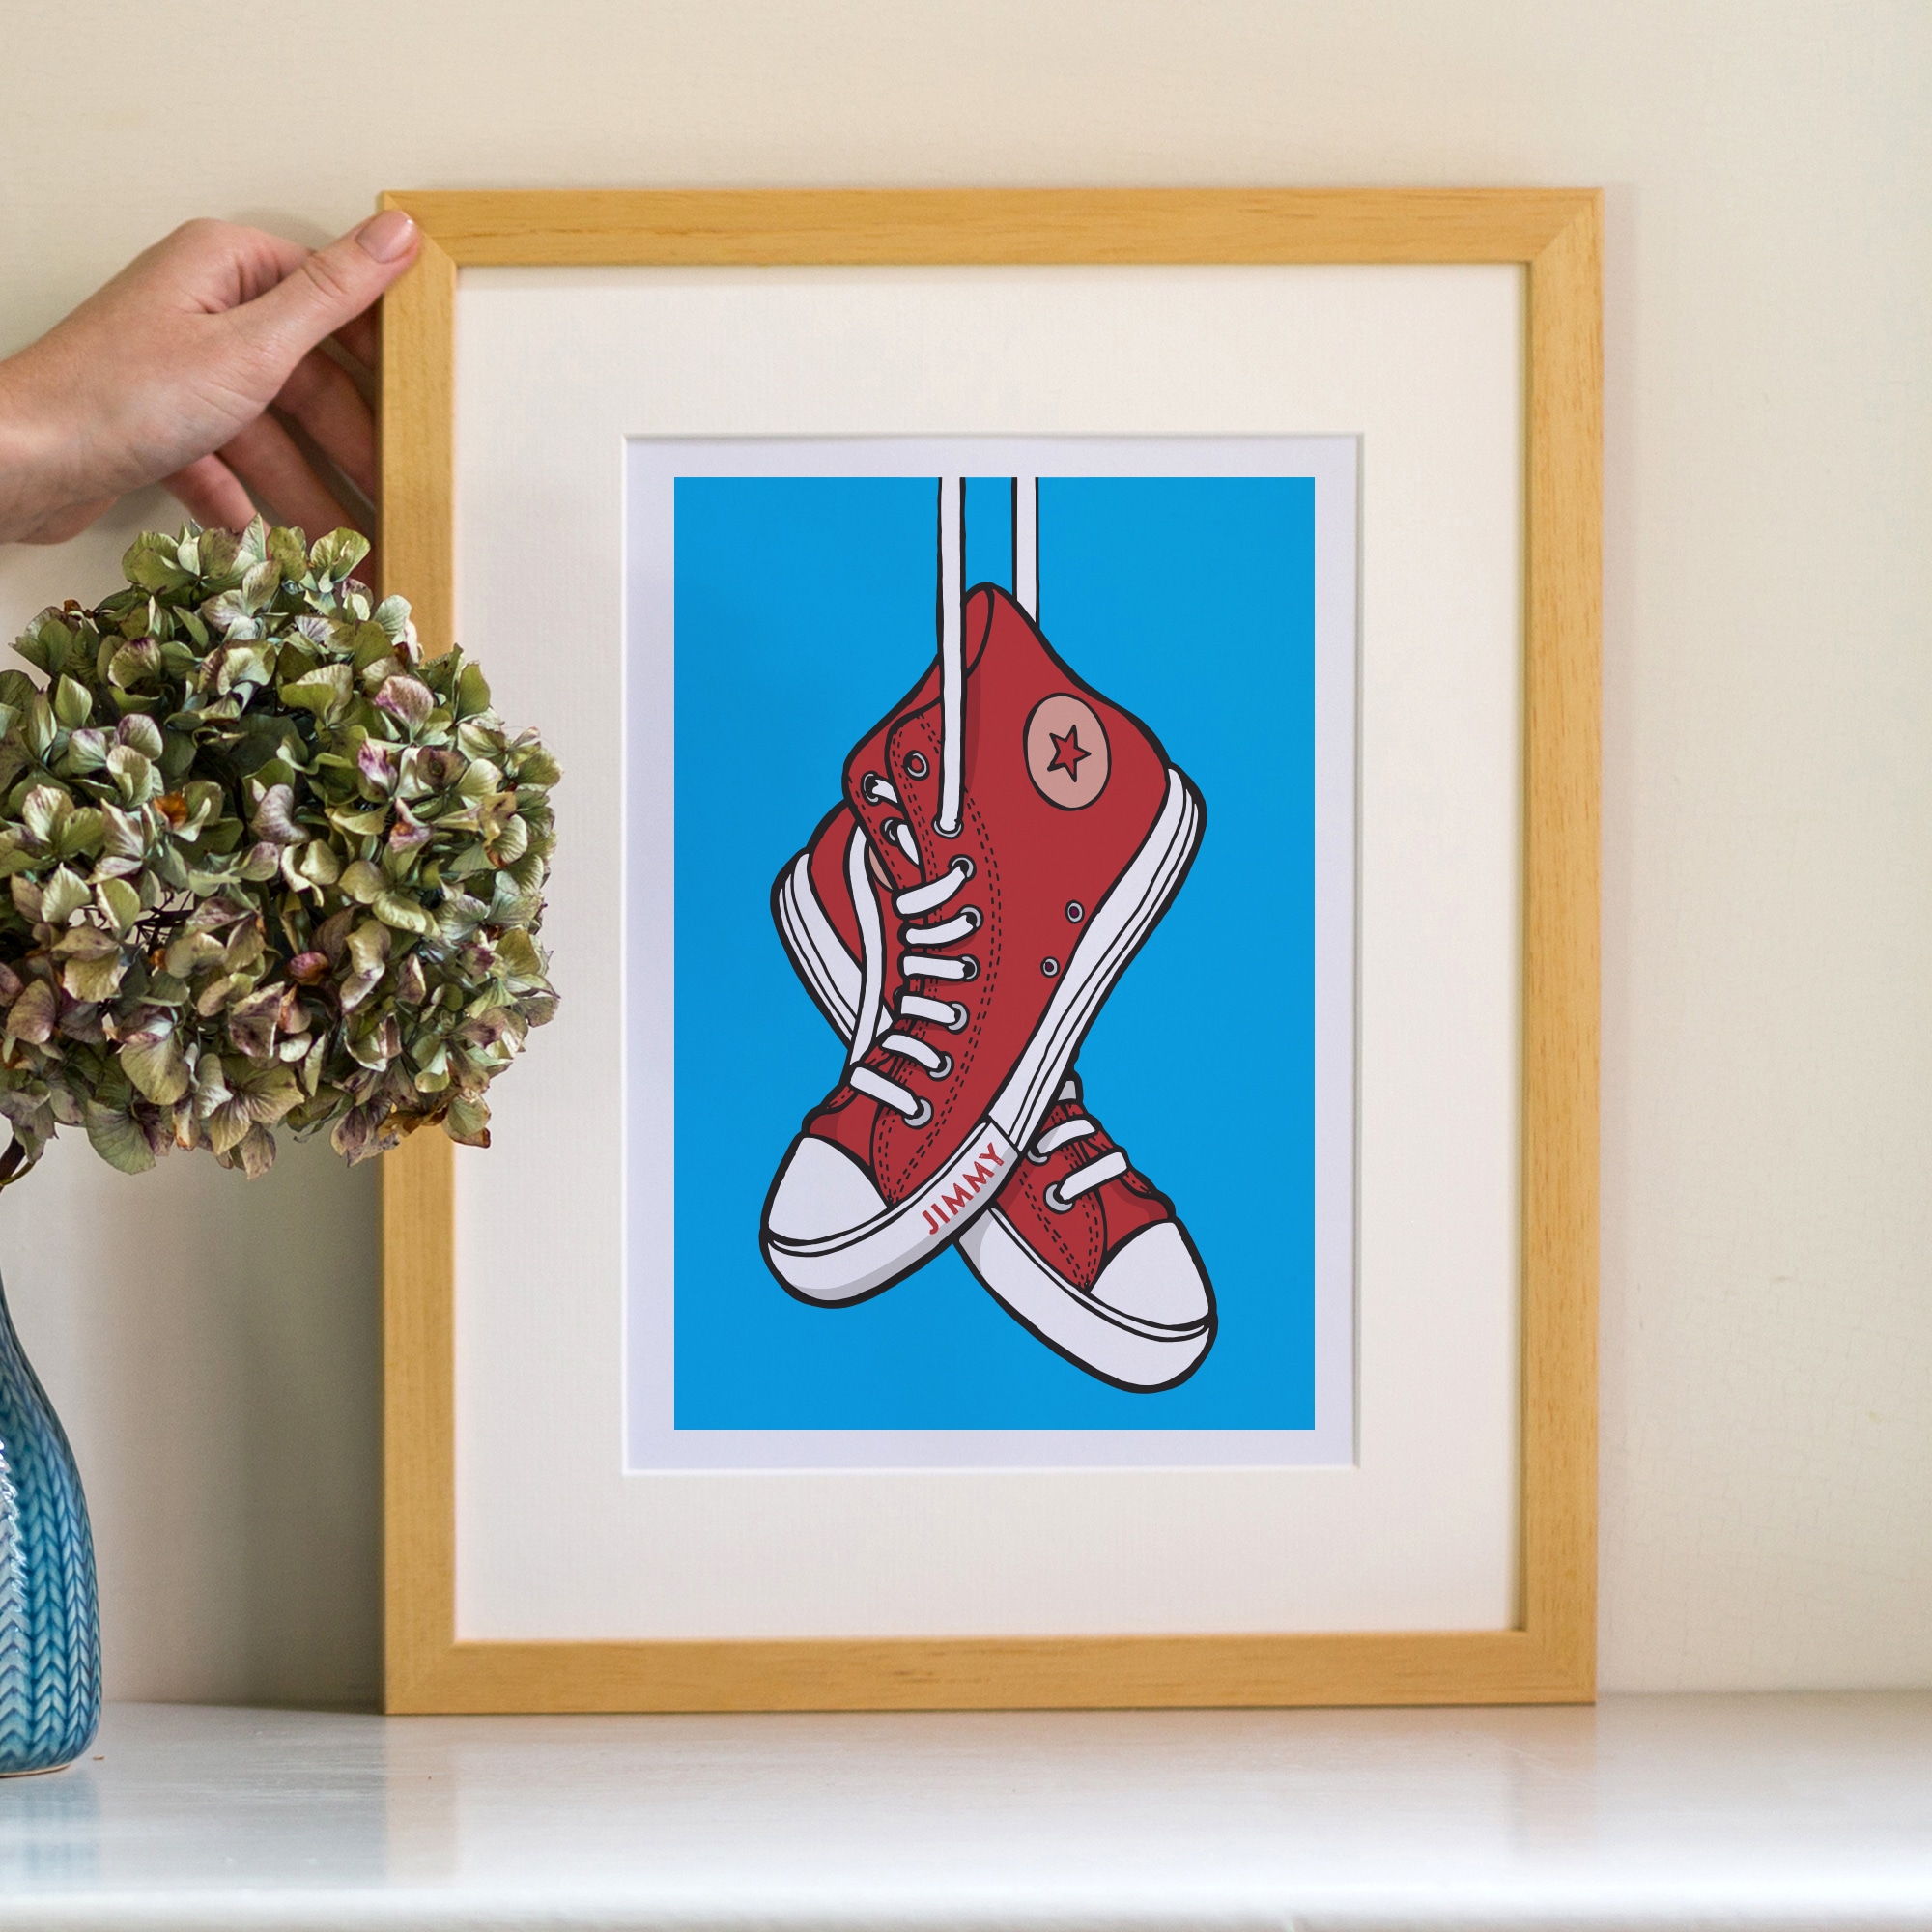 Baseball boot teenager print - An illustrated bright print for the home